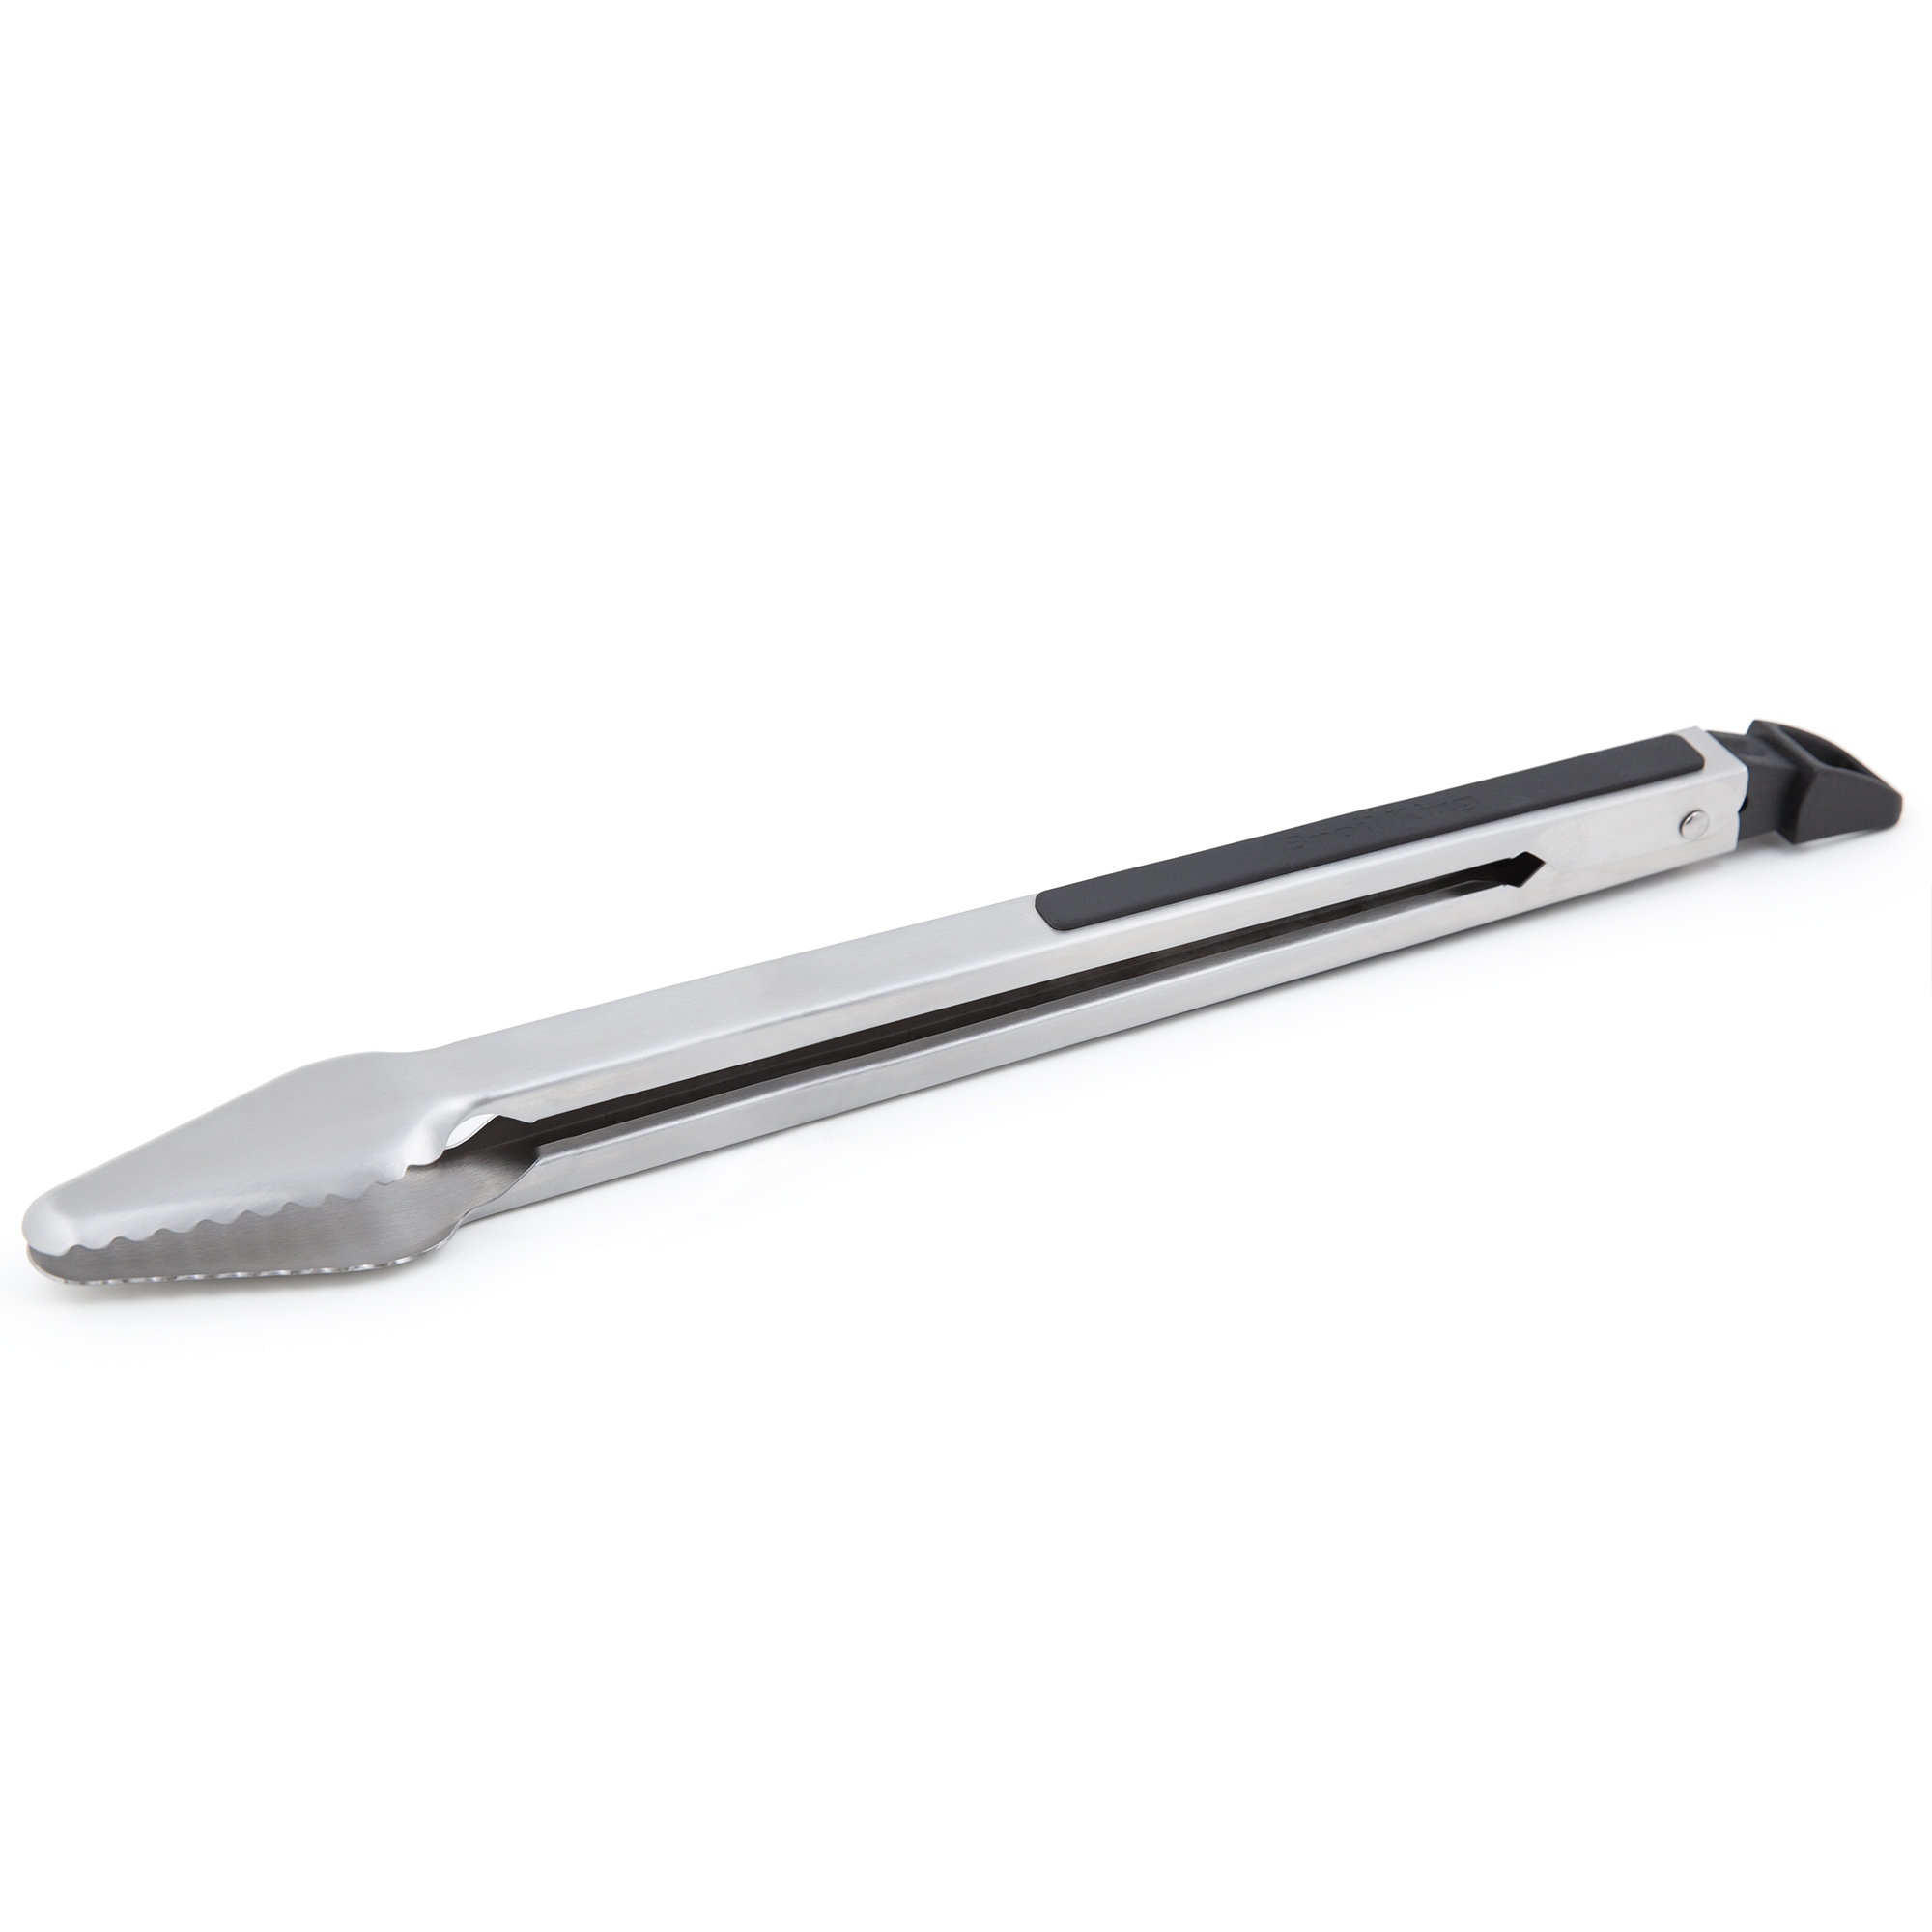 Broil King Stainless Steel Dishwasher Safe Tongs & Reviews